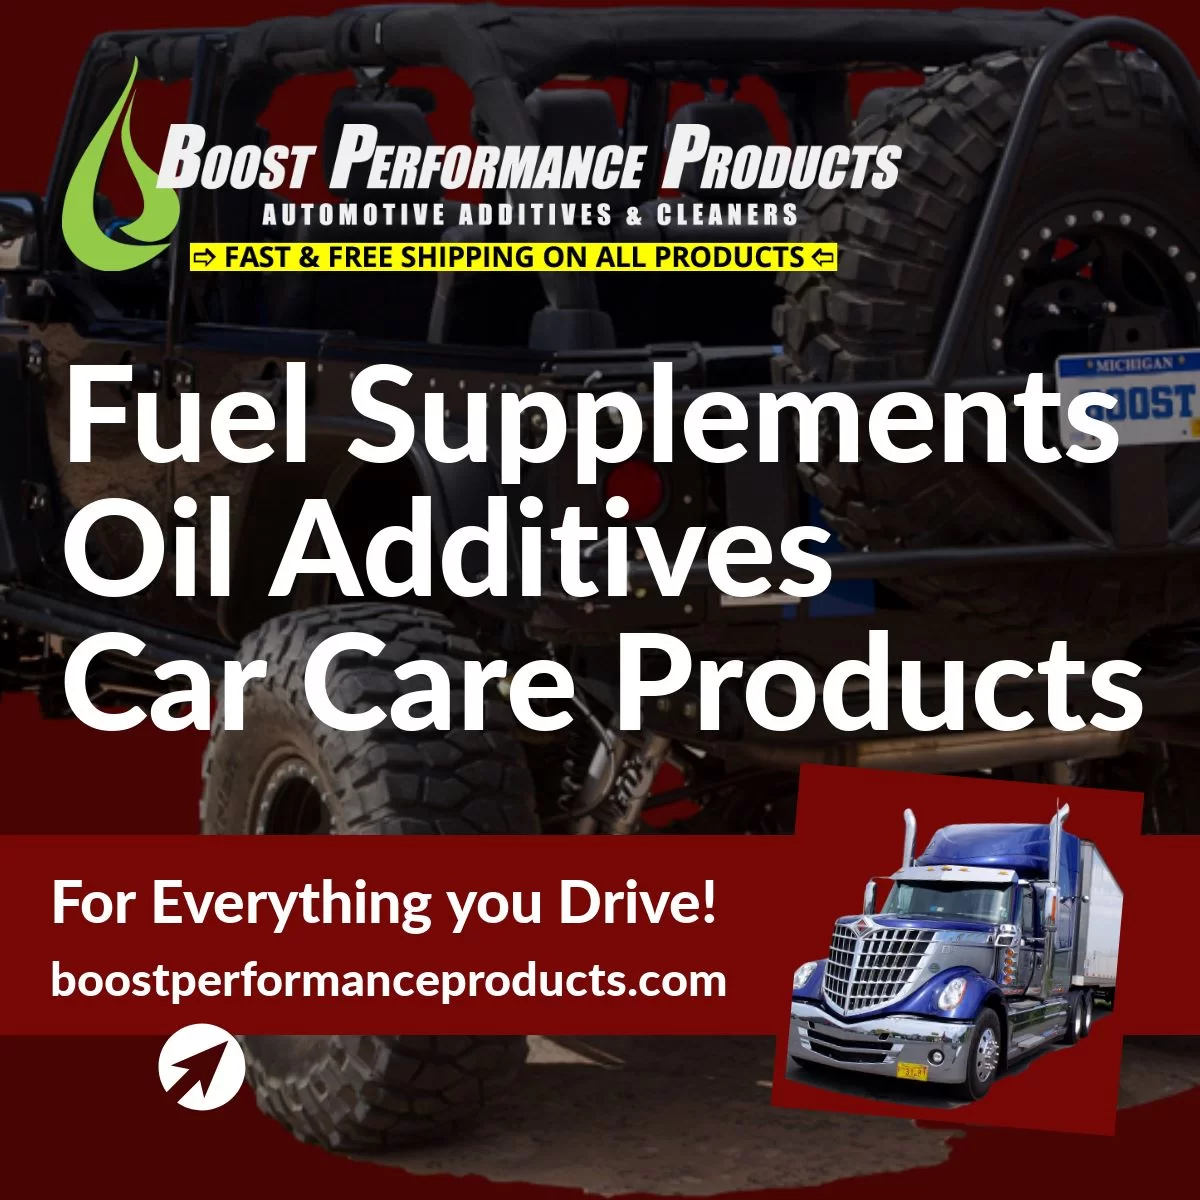 Fuel Supplements, Oil Additives, Car Care Products - Boost Performance Products